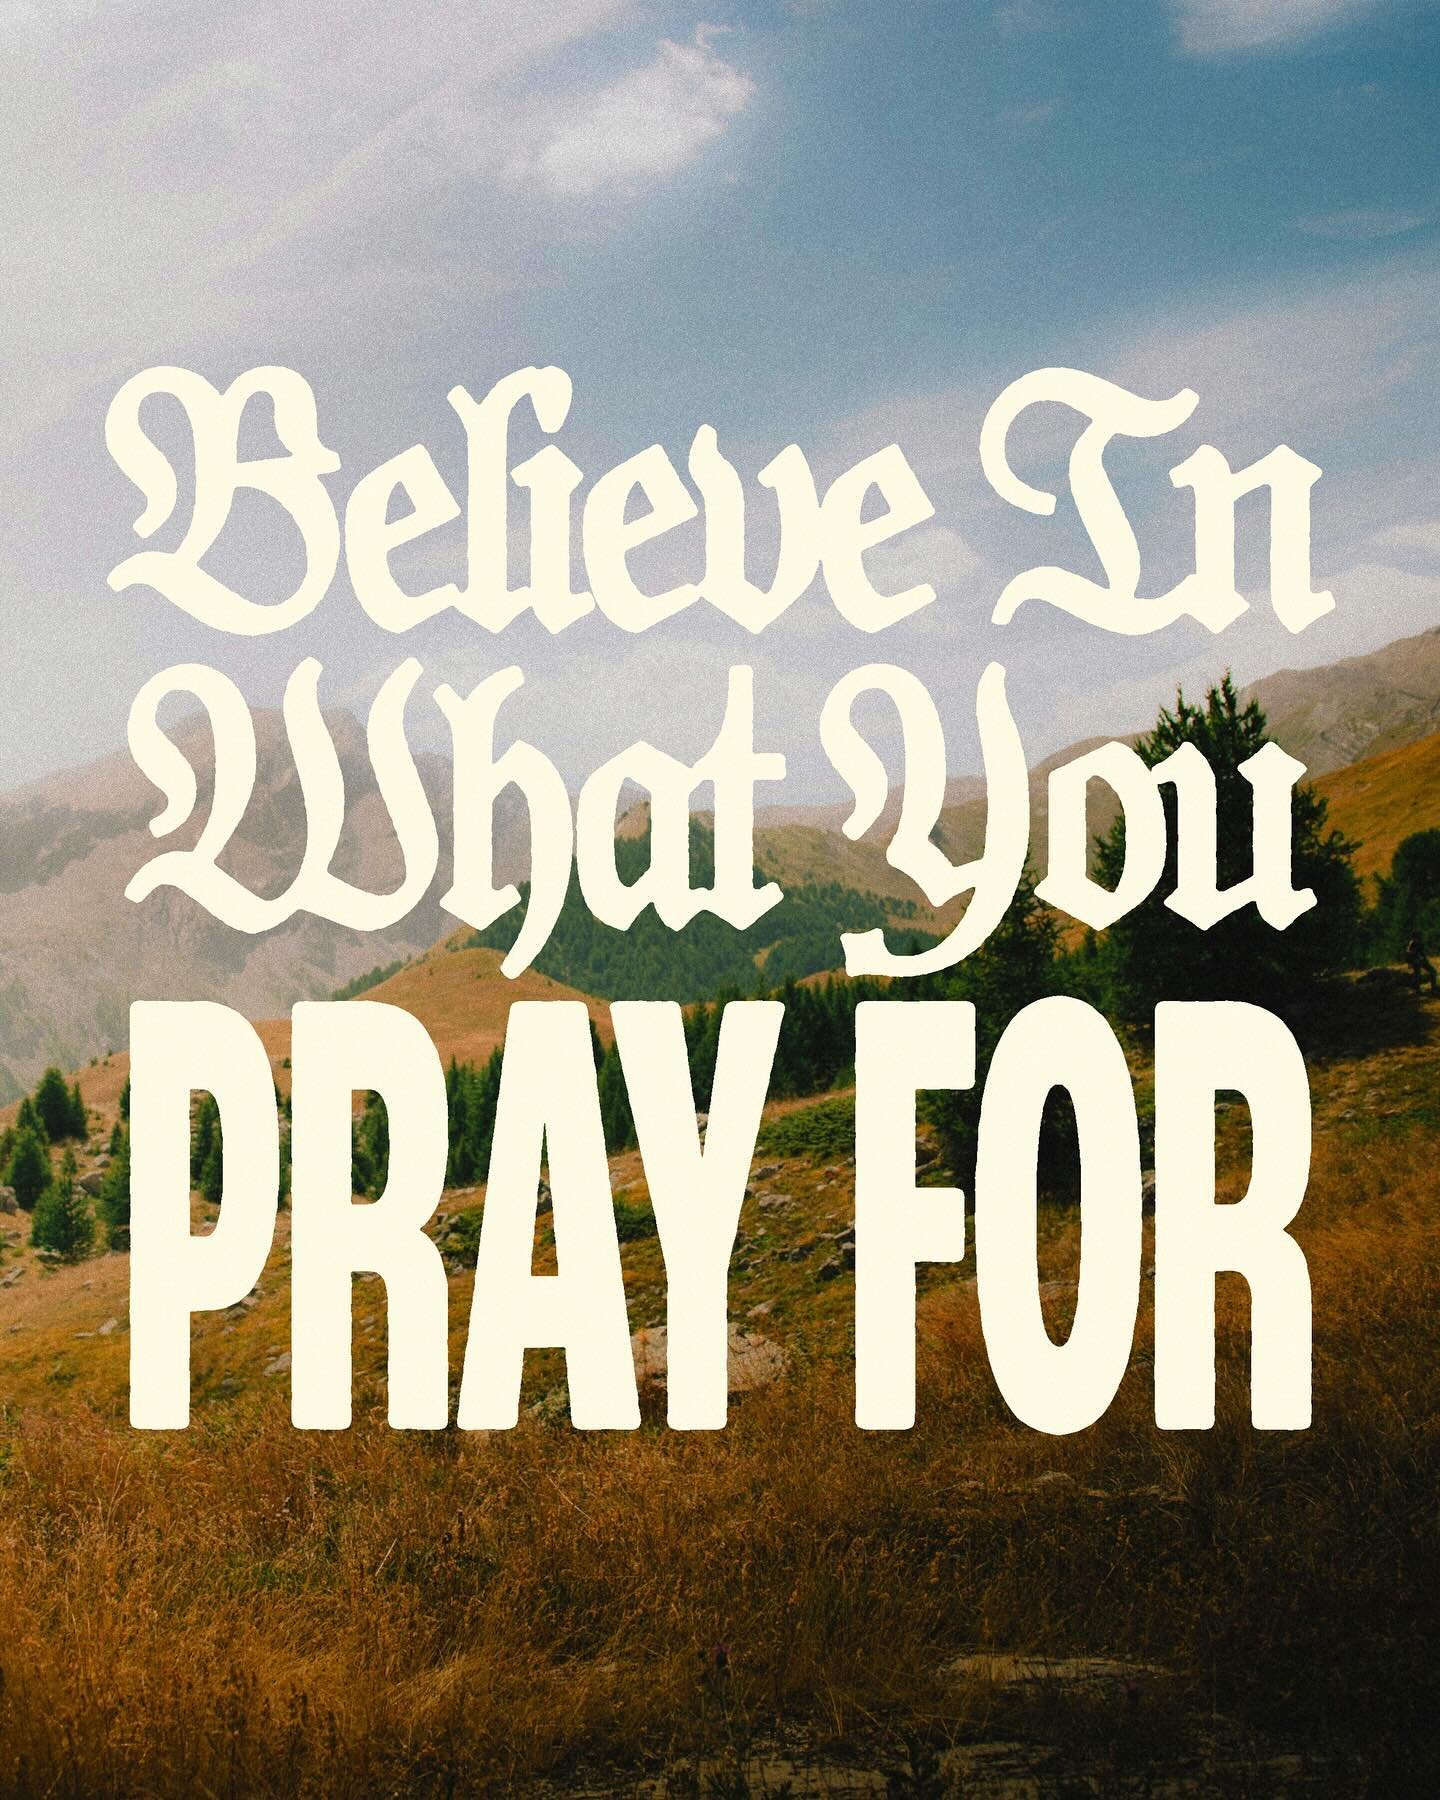 Do you actually believe what you pray? Sometimes we can ask God to do the extravagant and the miraculous but actually doubt that it&rsquo;ll ever become a reality. Jesus assures us that if we have faith AND do not doubt he will answer our prayers (ac